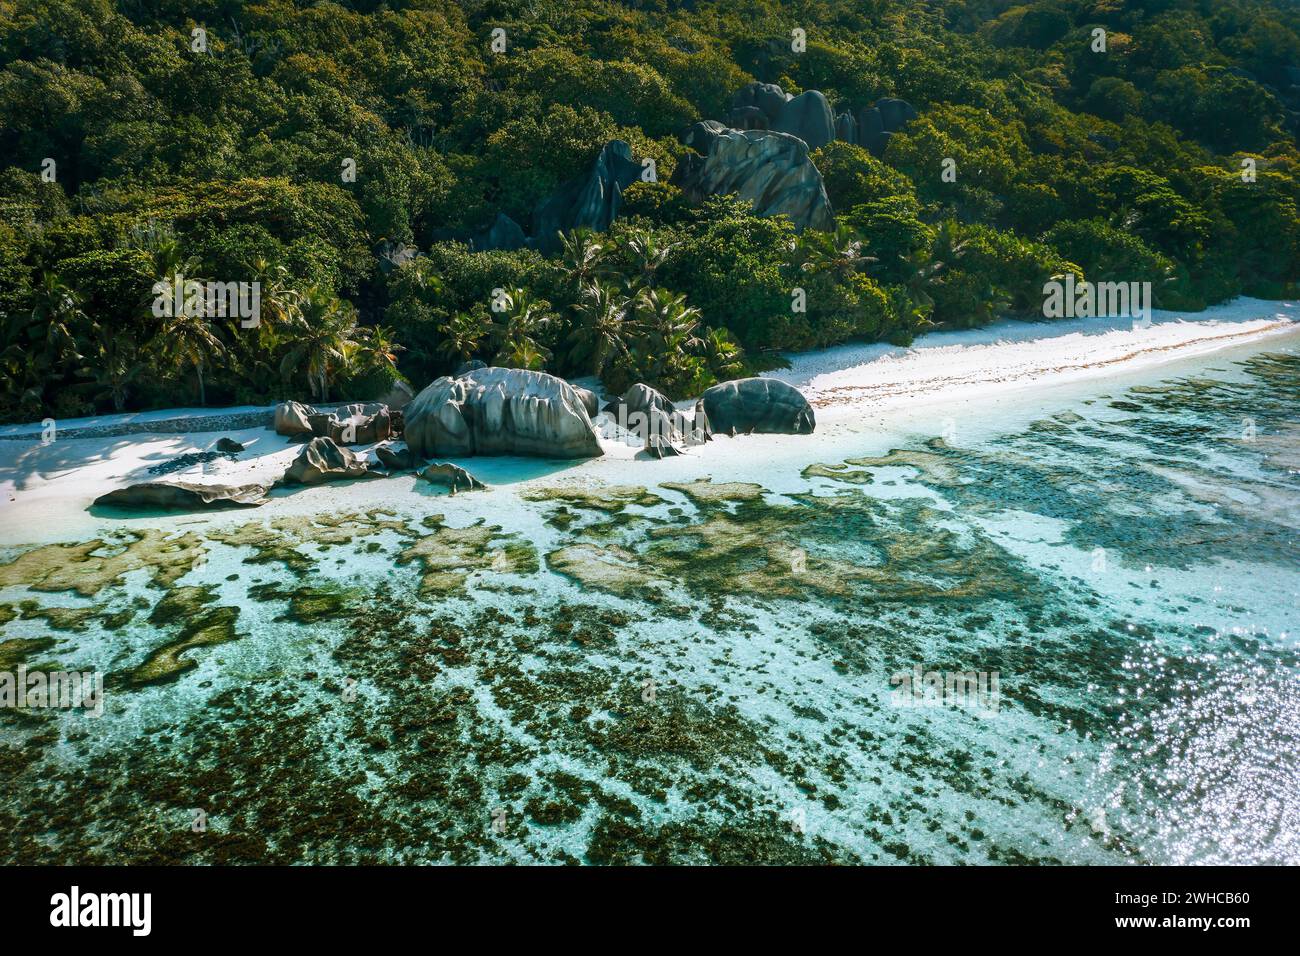 Anse Source d'Argent beach at La Digue island, Seychelles from drone aerial perspective. Stock Photo